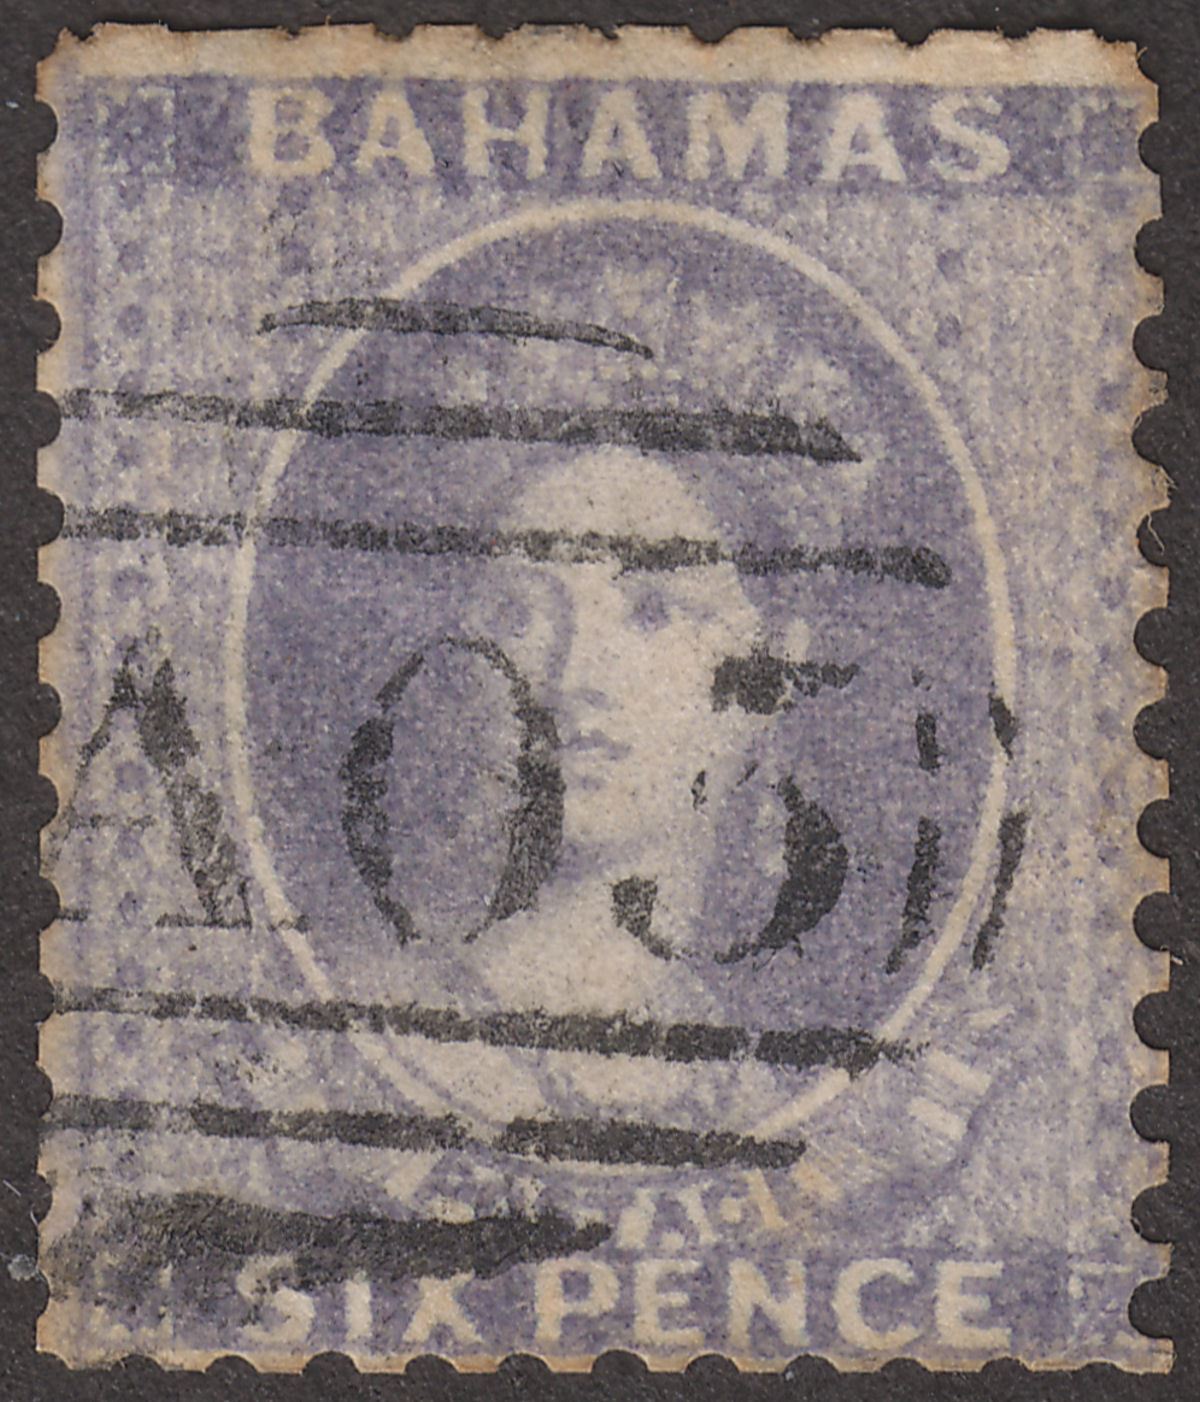 Bahamas 1862 QV Chalon 6d Lavender-Grey perf 11½, 12 Compound 11* Used SG15